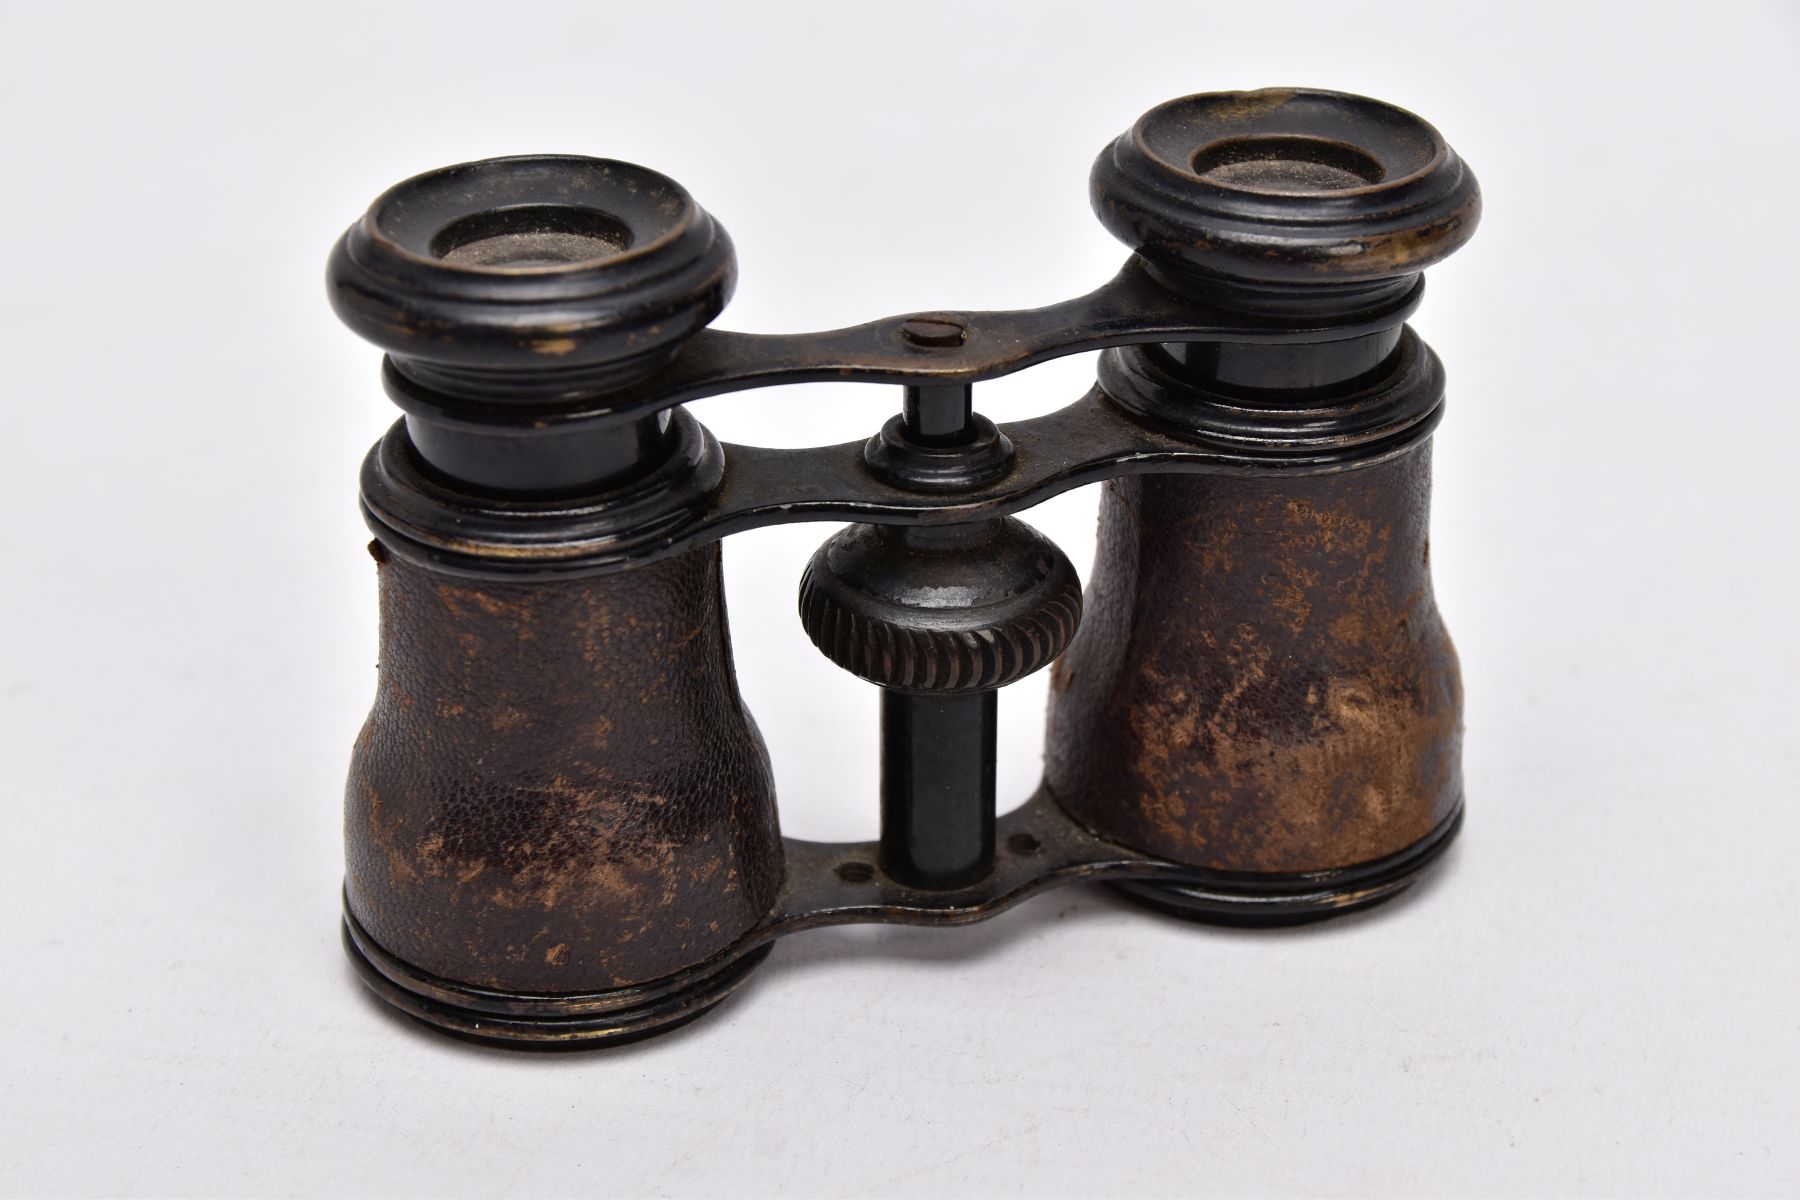 A PAIR OF EARLY 20TH CENTURY OPERA GLASSES, leather cased objective barrels, central focus wheel - Image 2 of 6